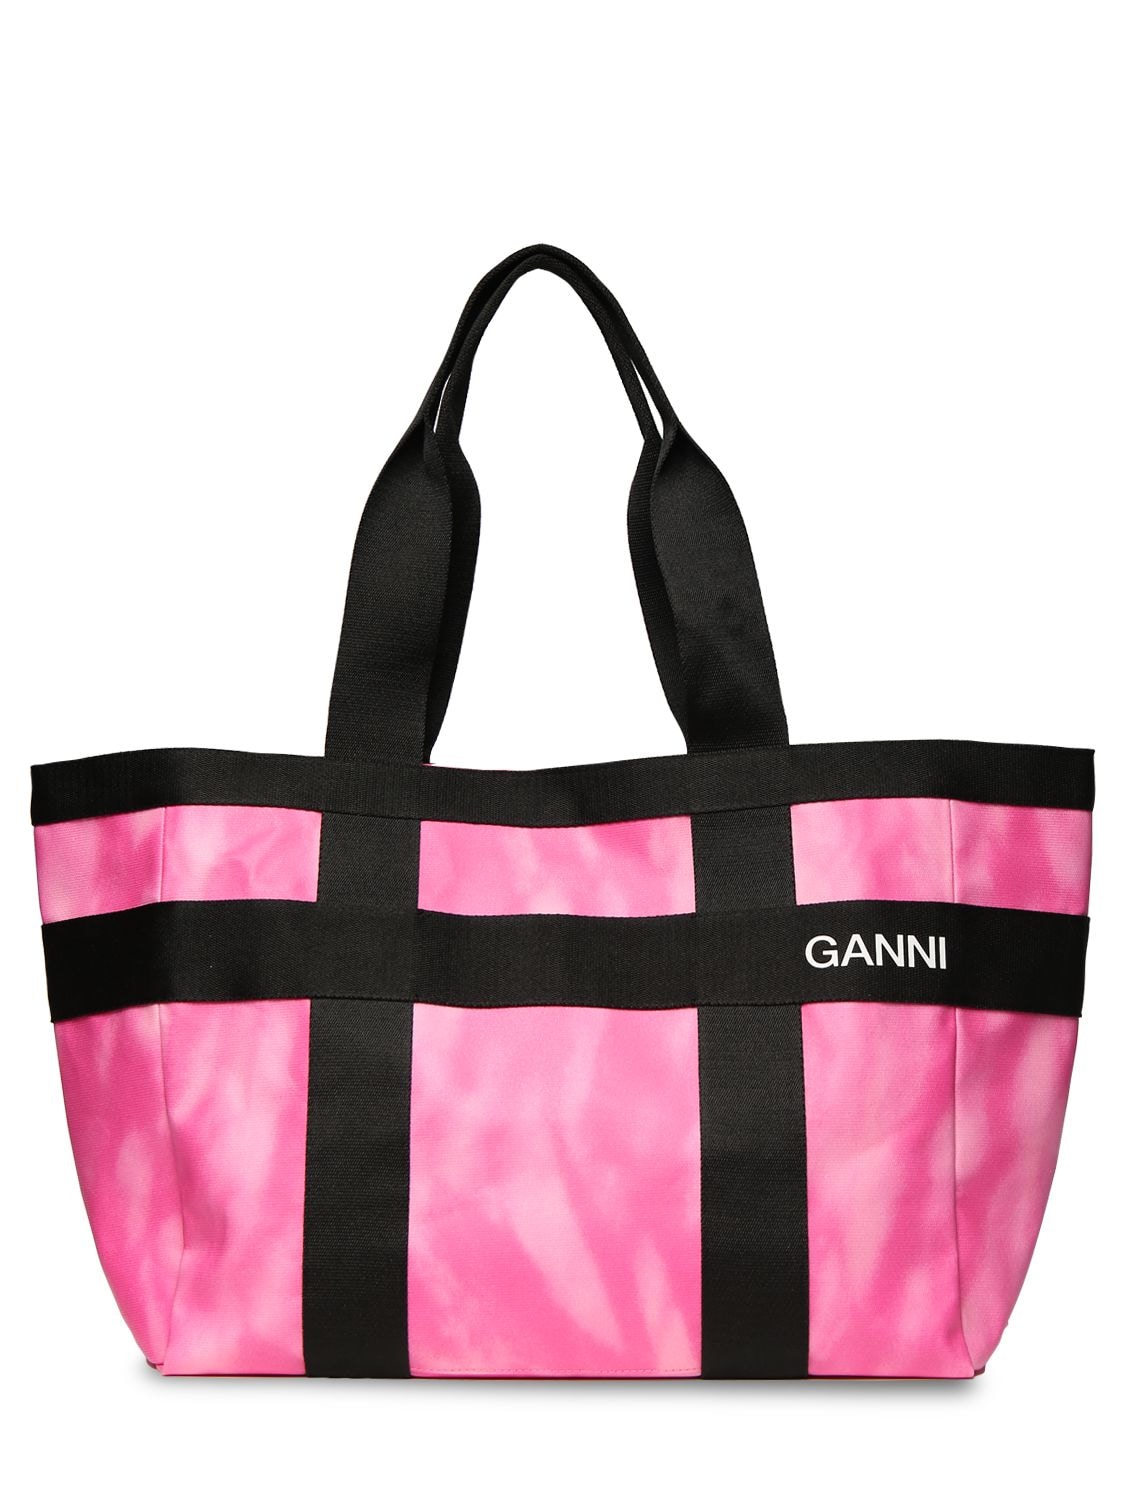 Printed Coated Canvas Tote Bag image